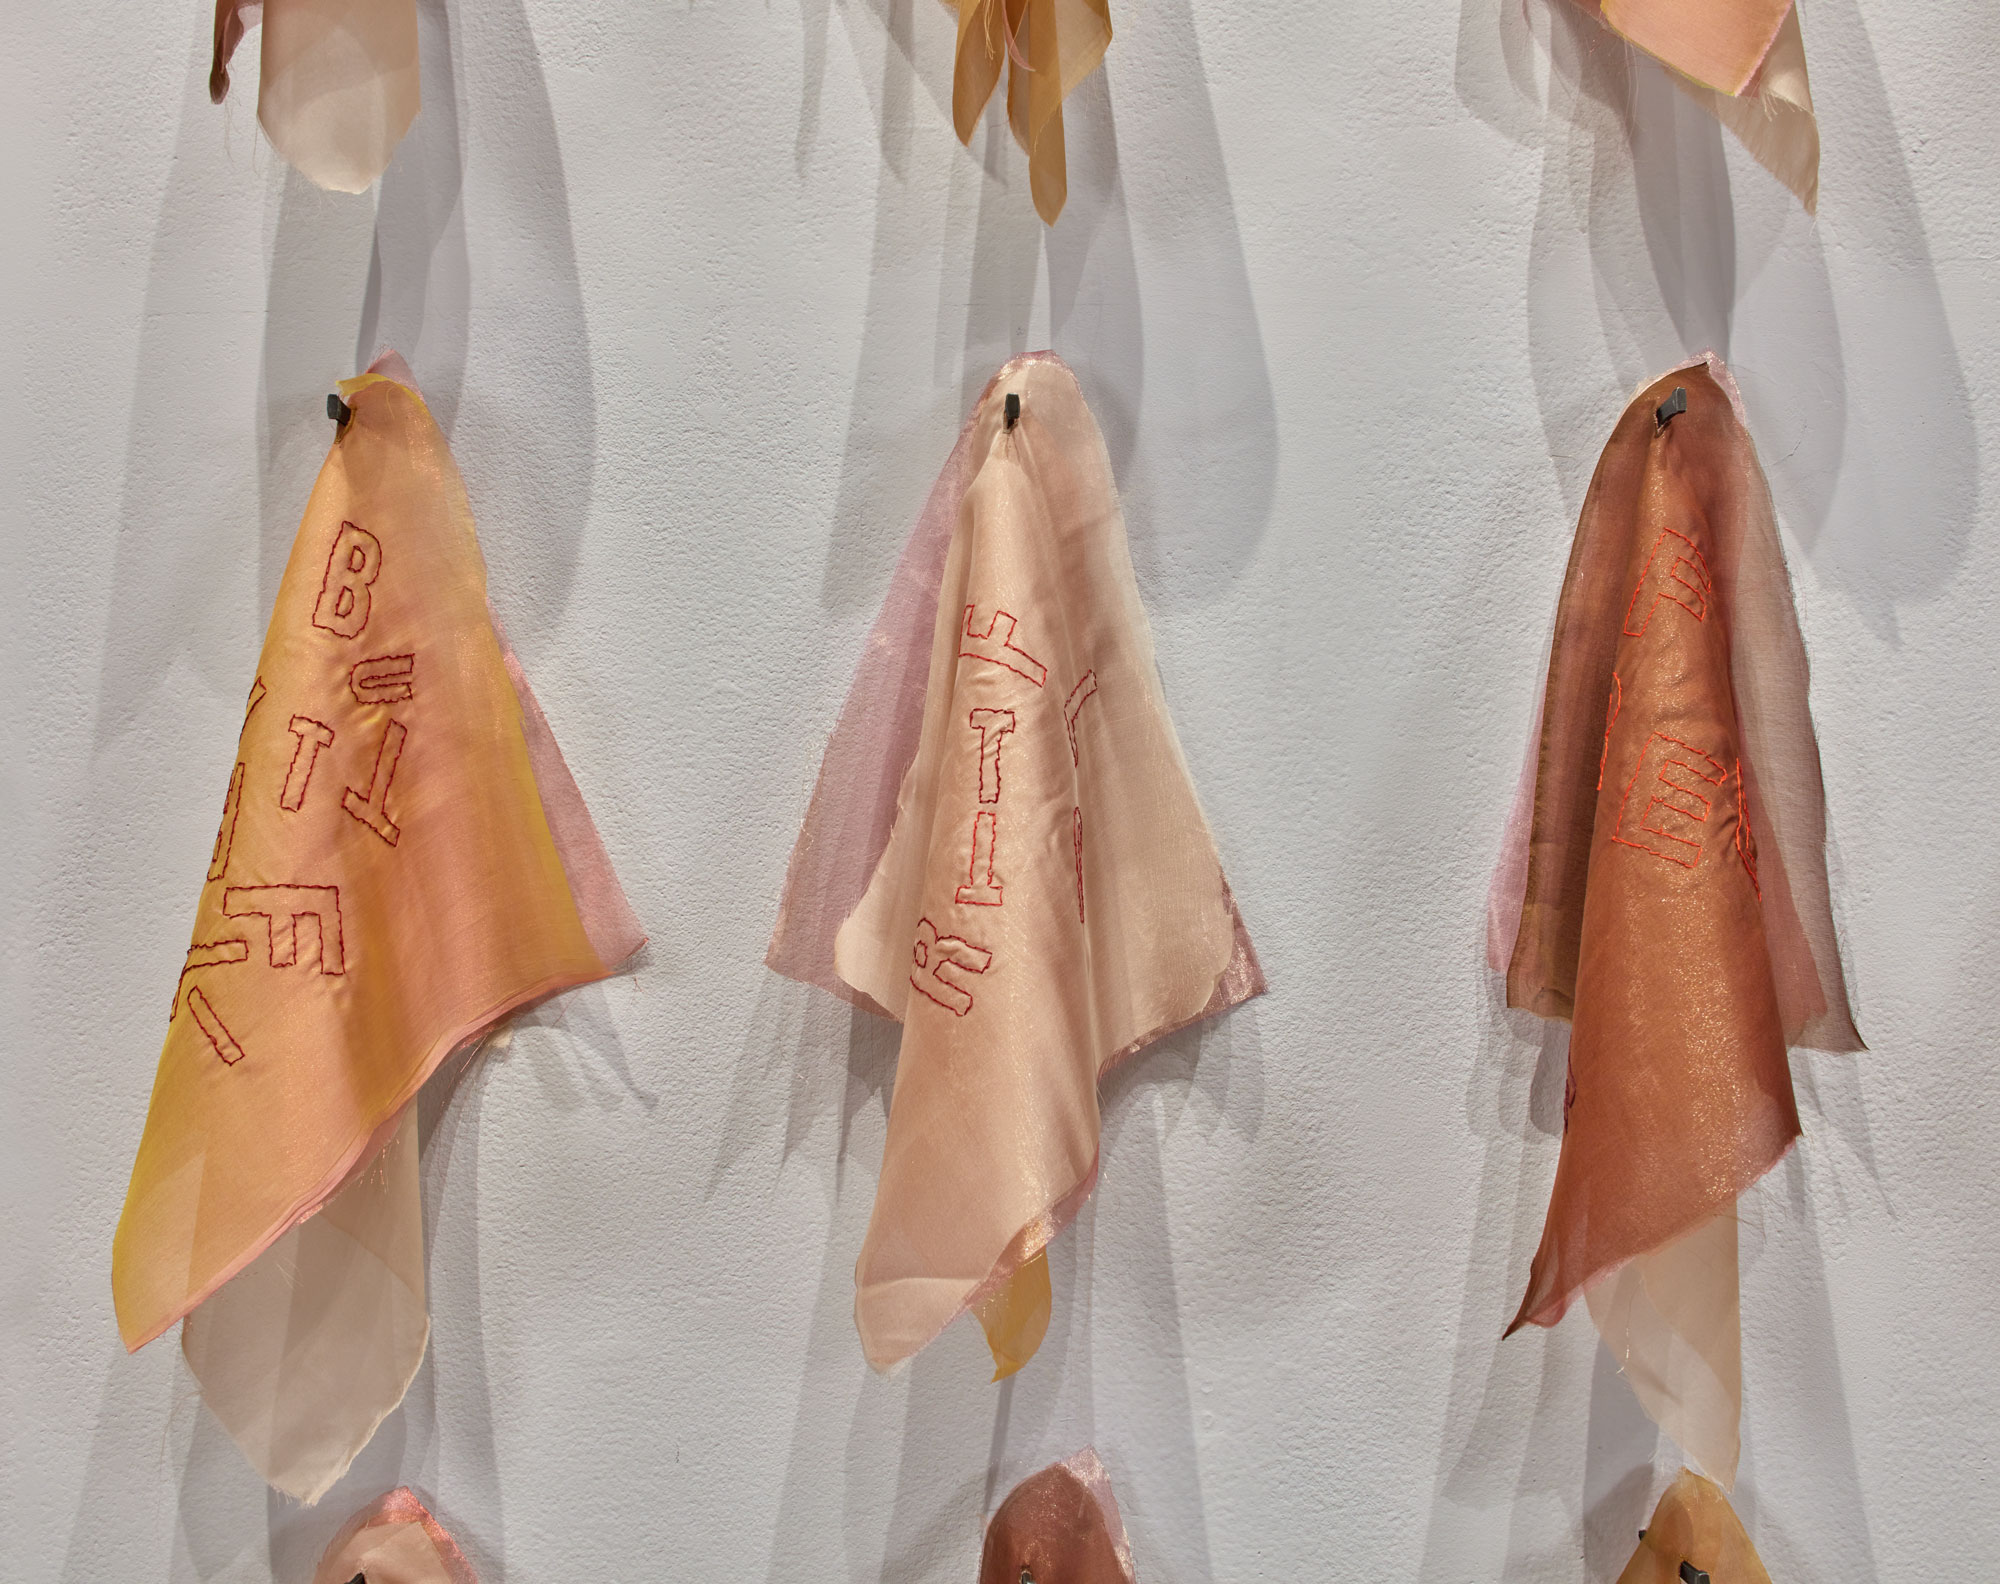 Rosemarie Chiarlone, Consequence (detail), 2019. embroidered silk organza sewn to silk chiffon leaves, masonry nails. text by poet Susan Weiner. 14 x 14 in., each of 28 fabric pieces; 112 x 90 x 7 in. as installed. Courtesy of the artist and Priscilla Juvelis Rare Books. Installation view of Skyway 20/21 exhibition at USF Contemporary Art Museum. Photo: Will Lytch.